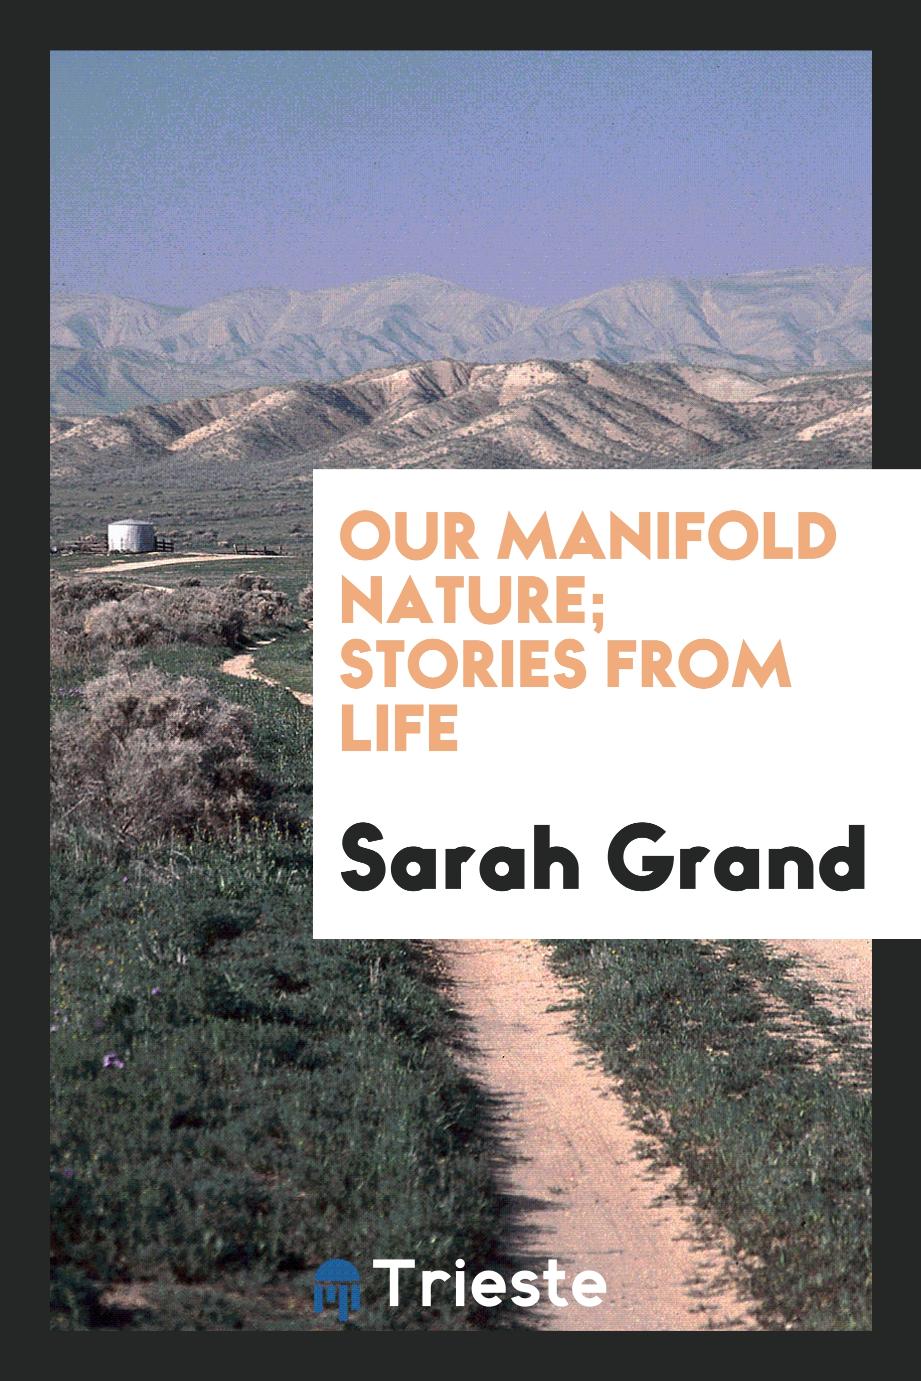 Our manifold nature; stories from life